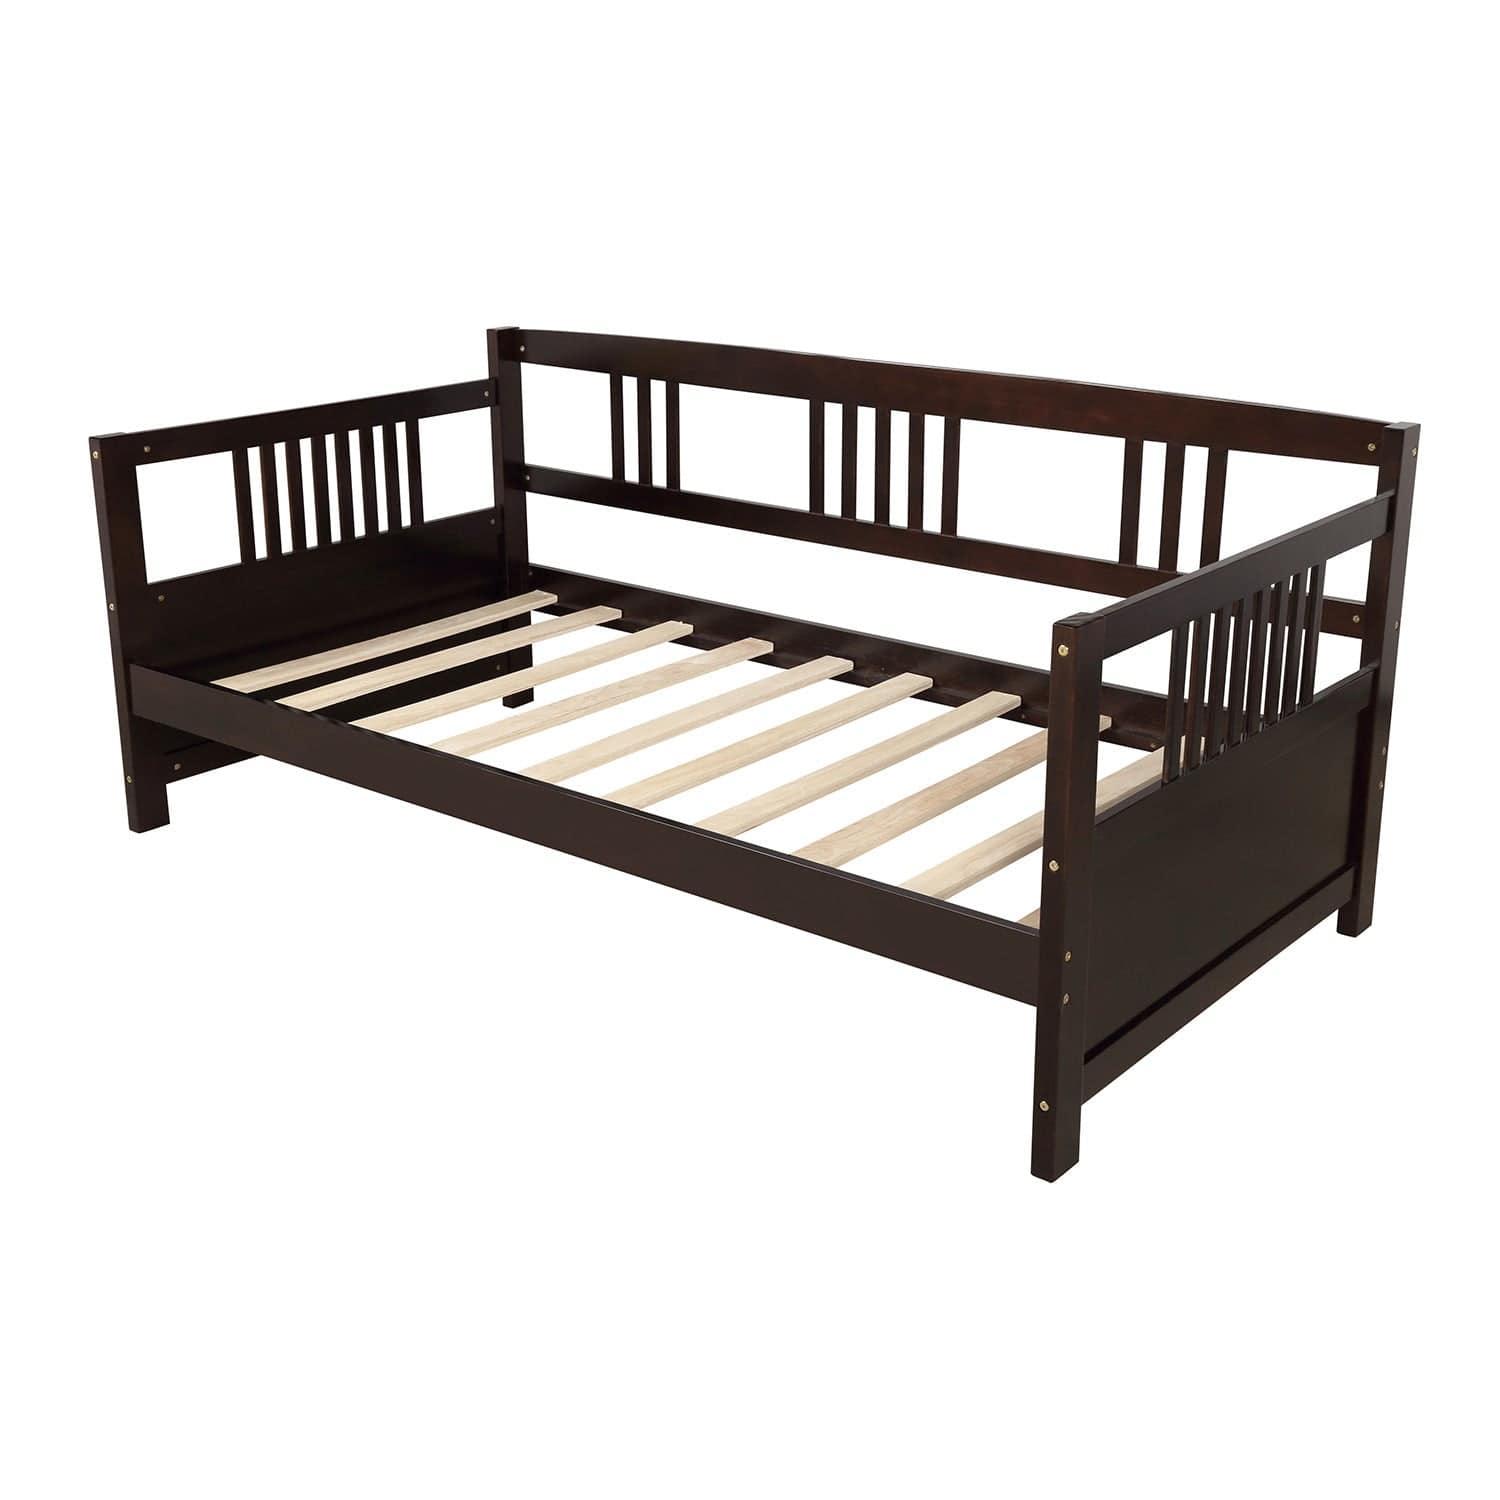 Shop Modern Solid Wood Daybed, Multifunctional, Twin Size, Espresso (Previous SKU: WF190234AAP) Mademoiselle Home Decor